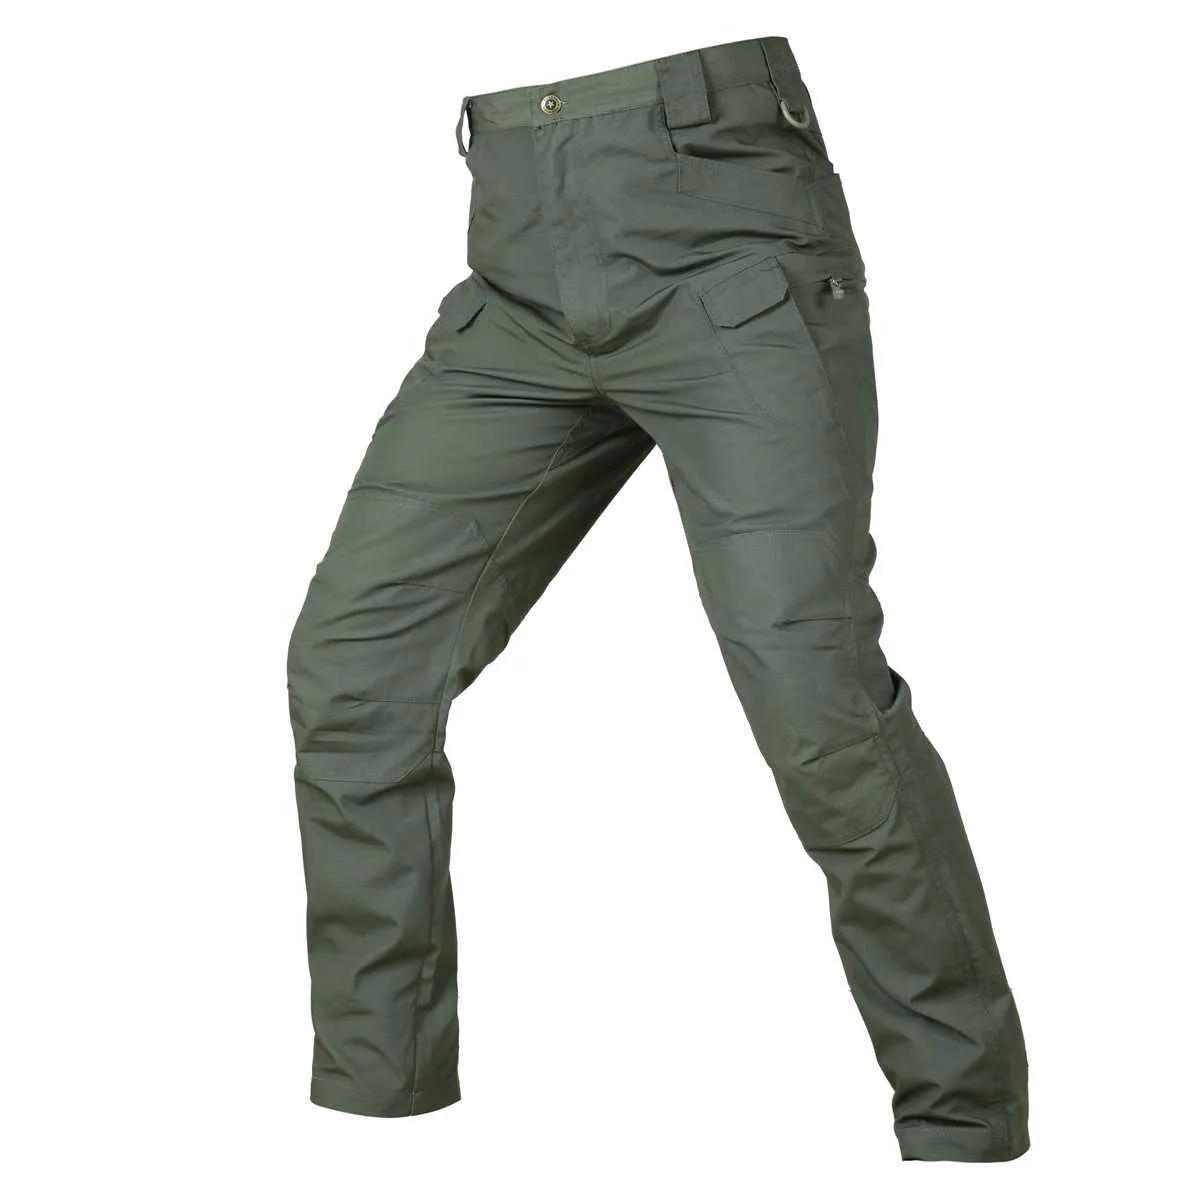 Custom Mens 511 Tactical Pants Ripstop Multi Pocket Cargo Trousers Outdoor Training Work Hunting Hiking Wear